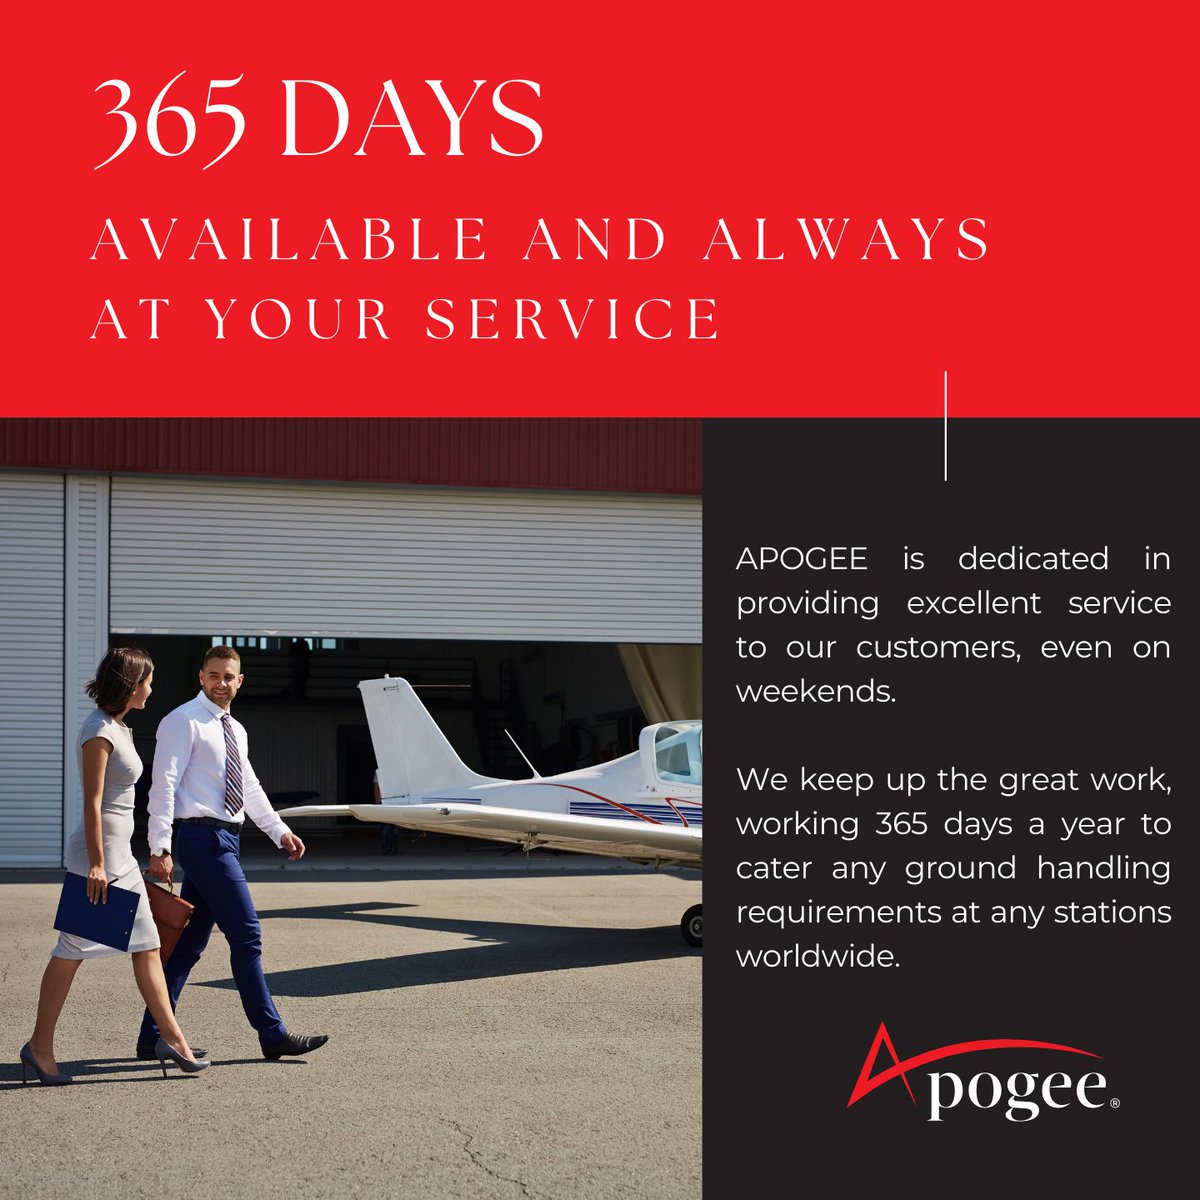 Business as usual even on weekends.

#apogee #tripsupport #aviation #charter #groundhandling #flightplanning #privateflight  #travel #experience #safety #team #quality #serviceexcellence #sales #aircraft #airtravel #luxury #business #saturdaypost #weekends